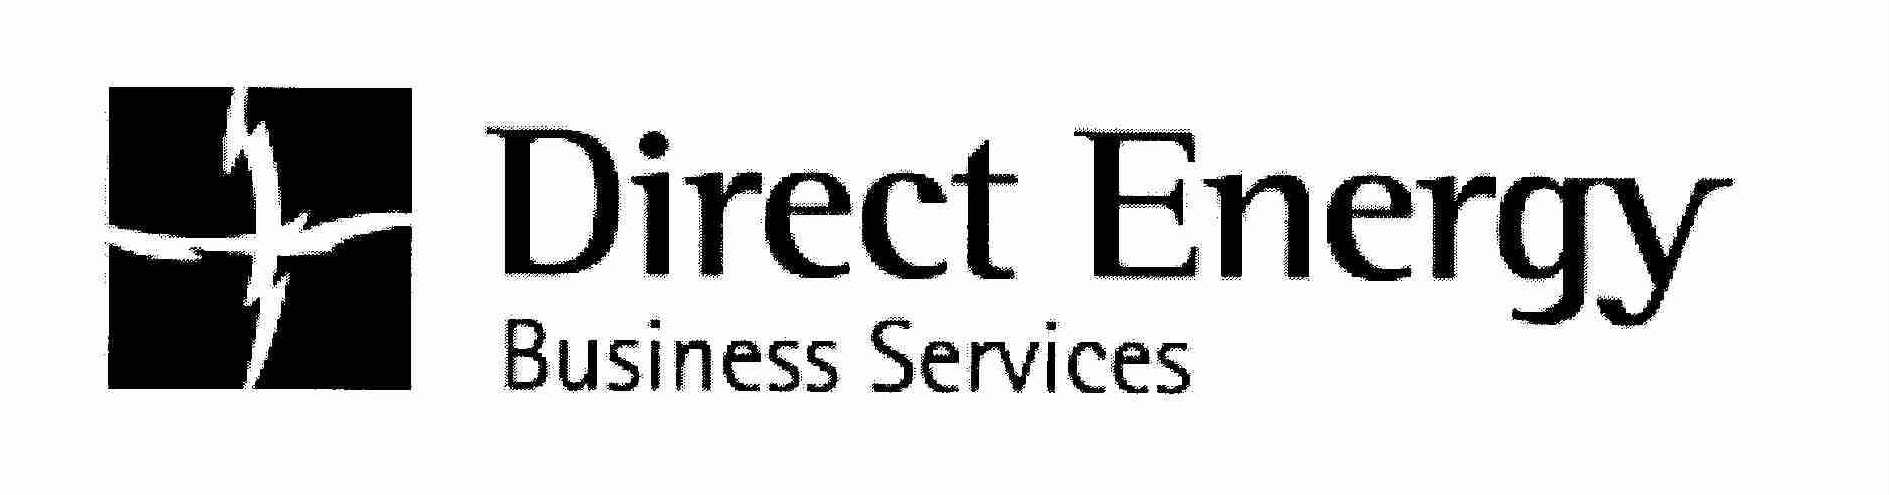 Trademark Logo DIRECT ENERGY BUSINESS SERVICES